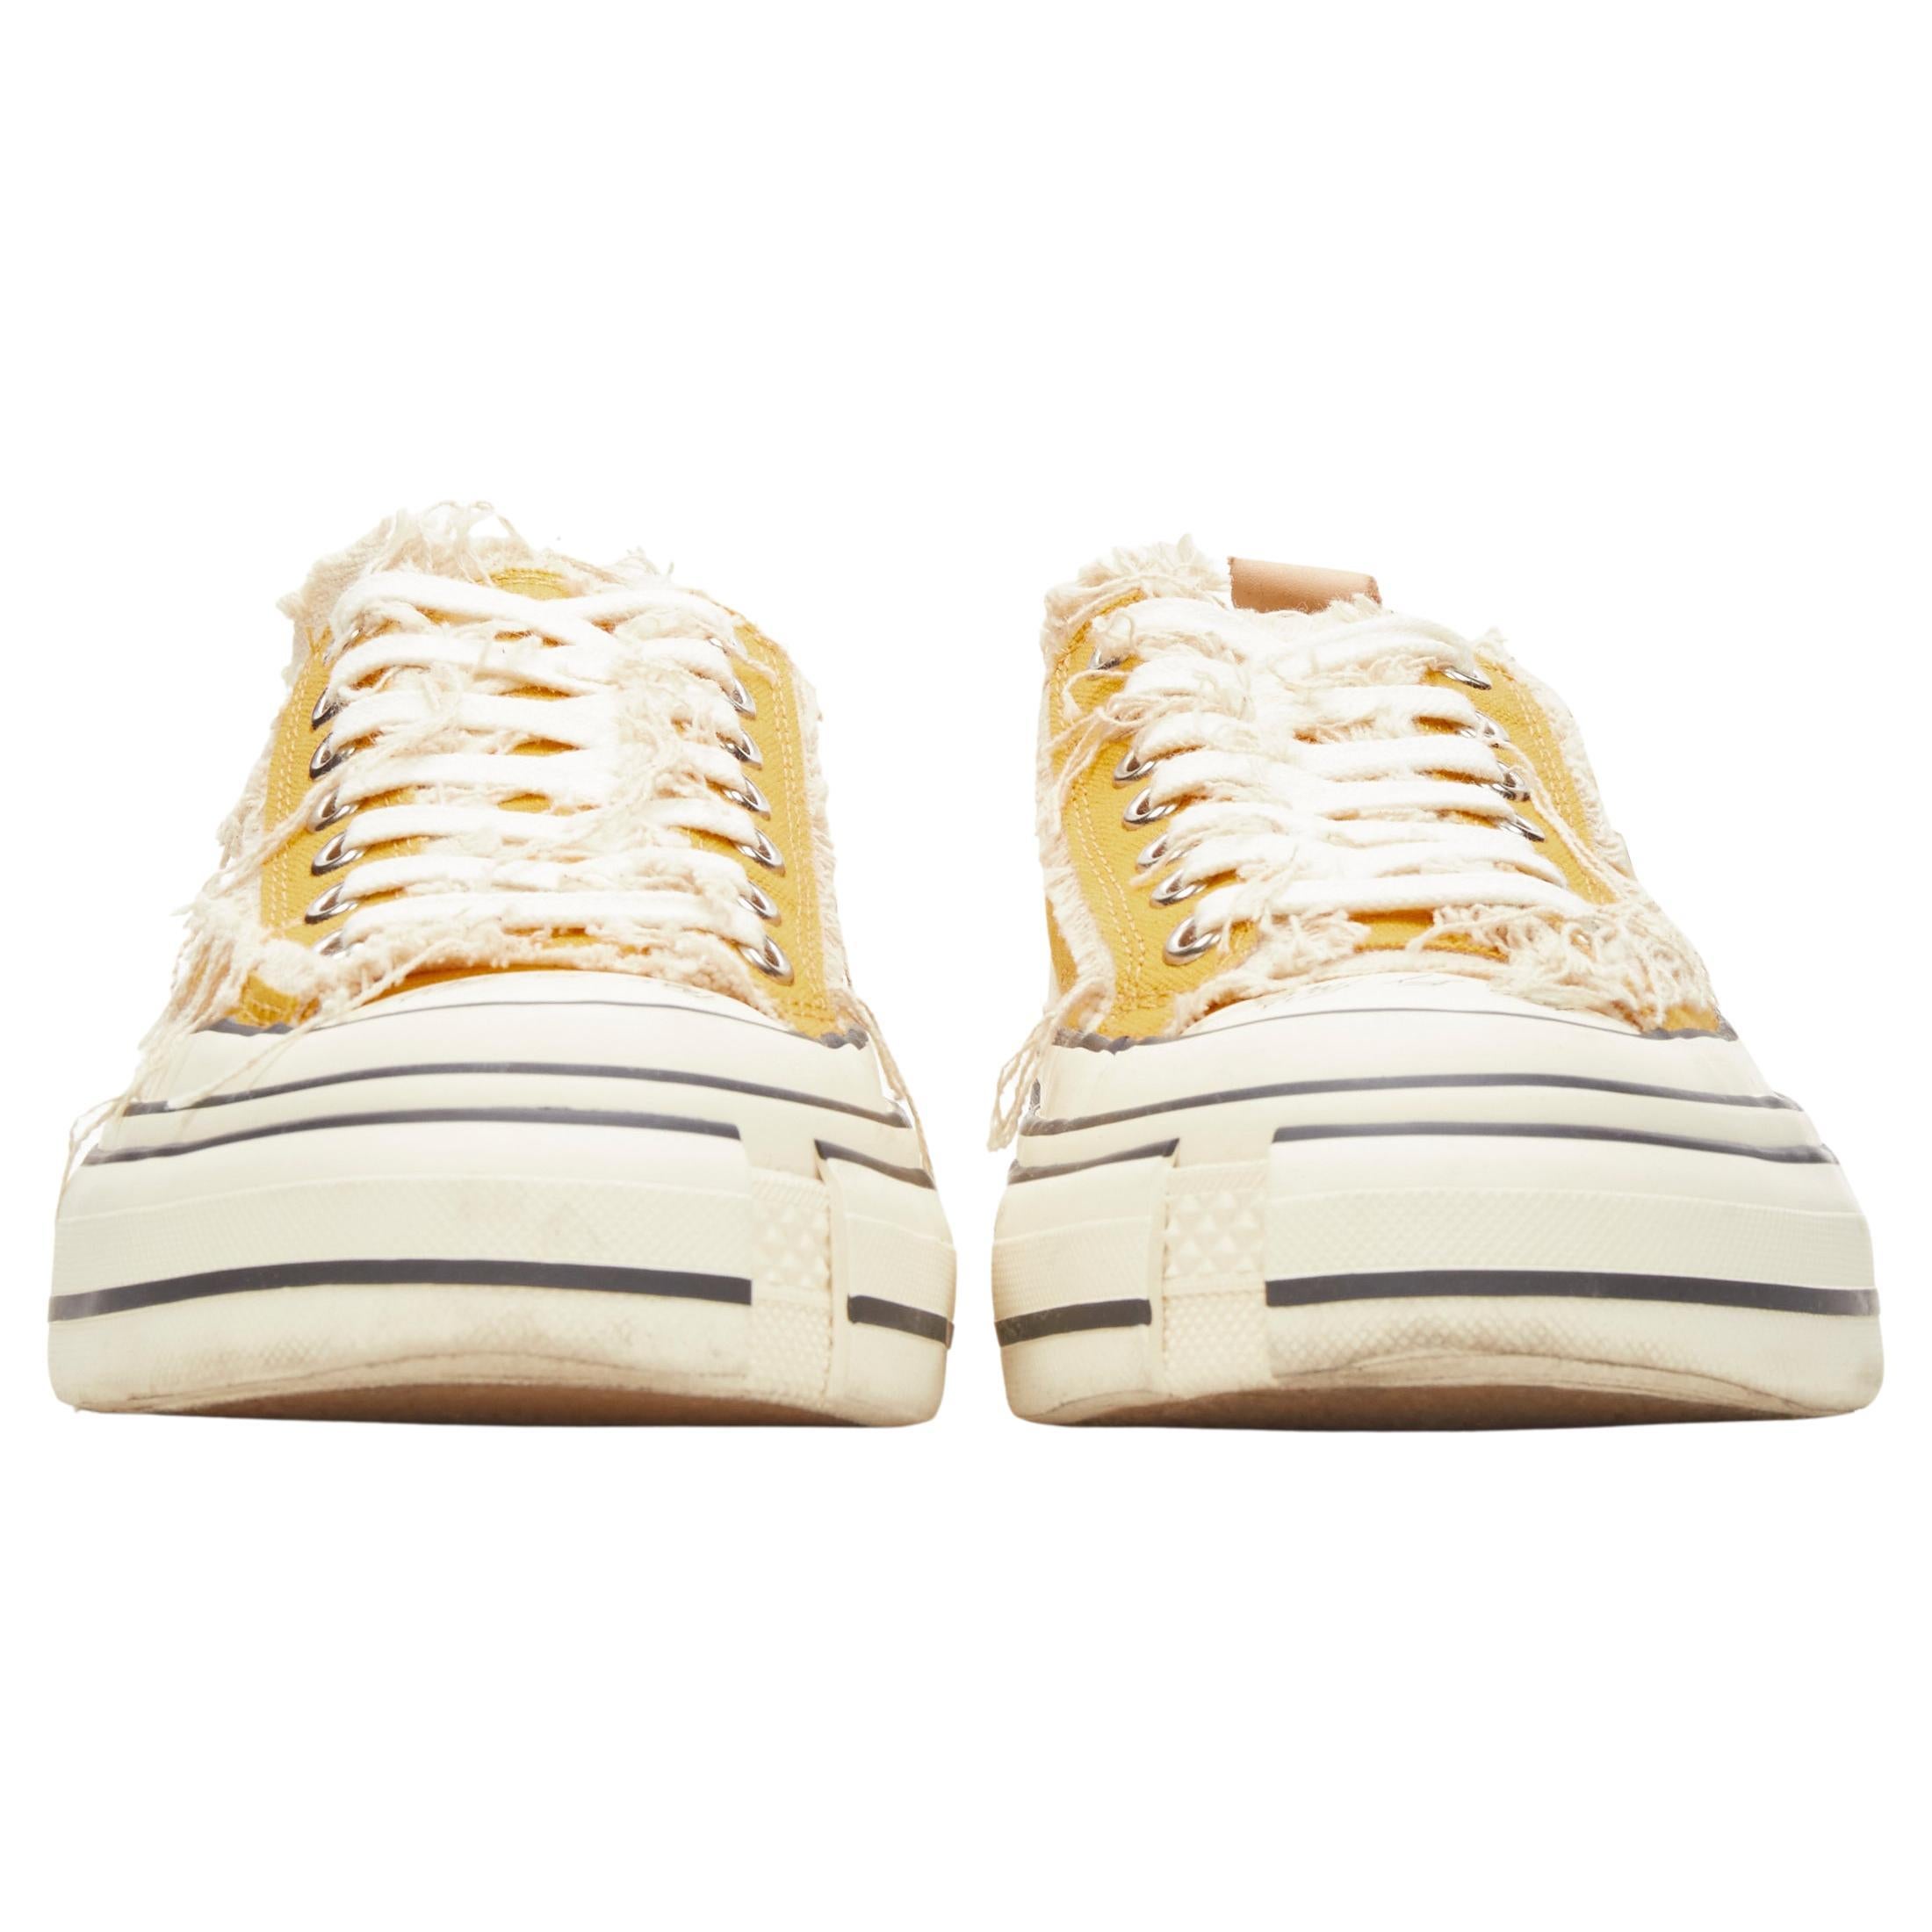 XVESSEL G.O.P. Lows yellow deconstructed distressed sneakers EU37 US7
Brand: XVessel
Model: GOP Lows
Material: Fabric
Color: Yellow
Pattern: Solid
Closure: Lace Up

CONDITION:
Condition: Very good, this item was pre-owned and is in very good